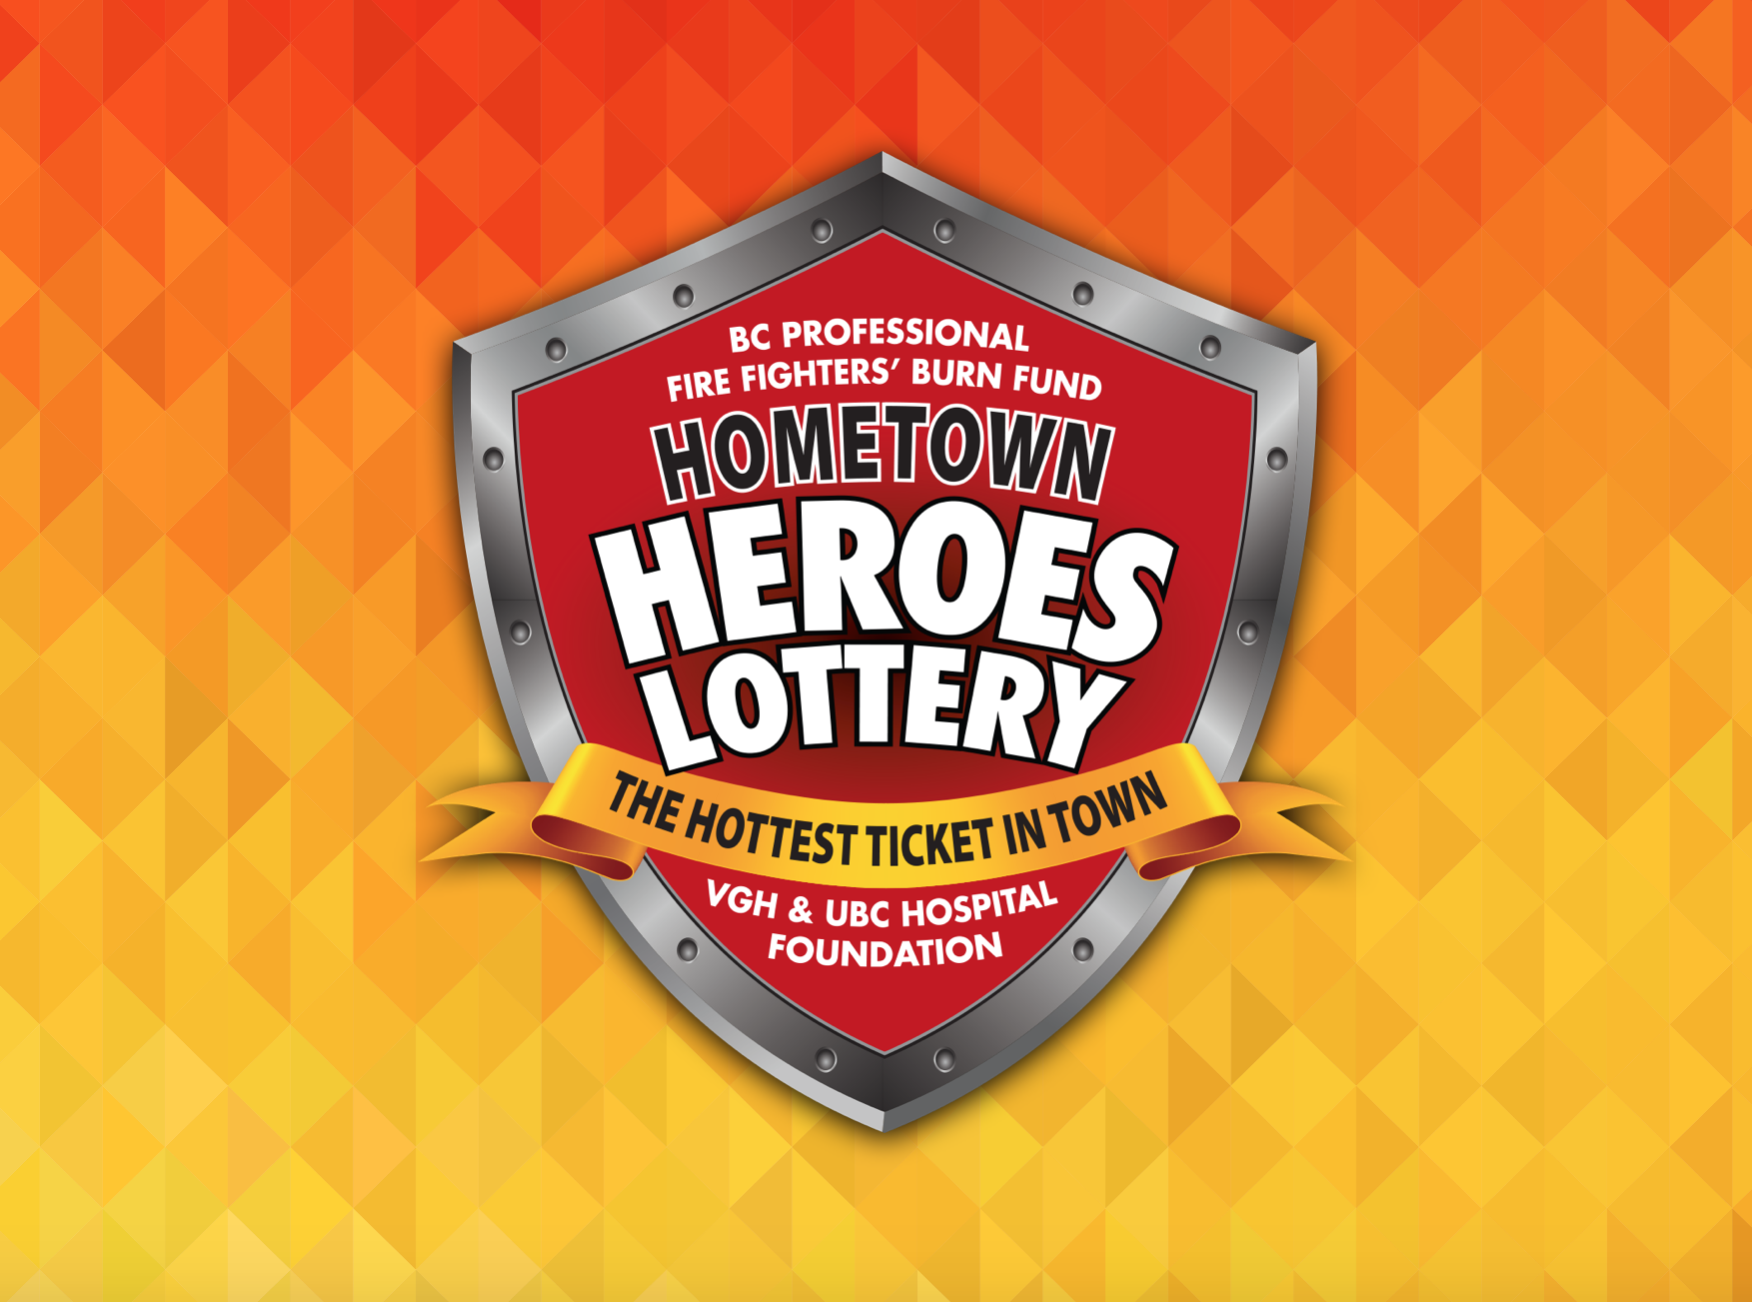 Image result for Home town Heroes lottery